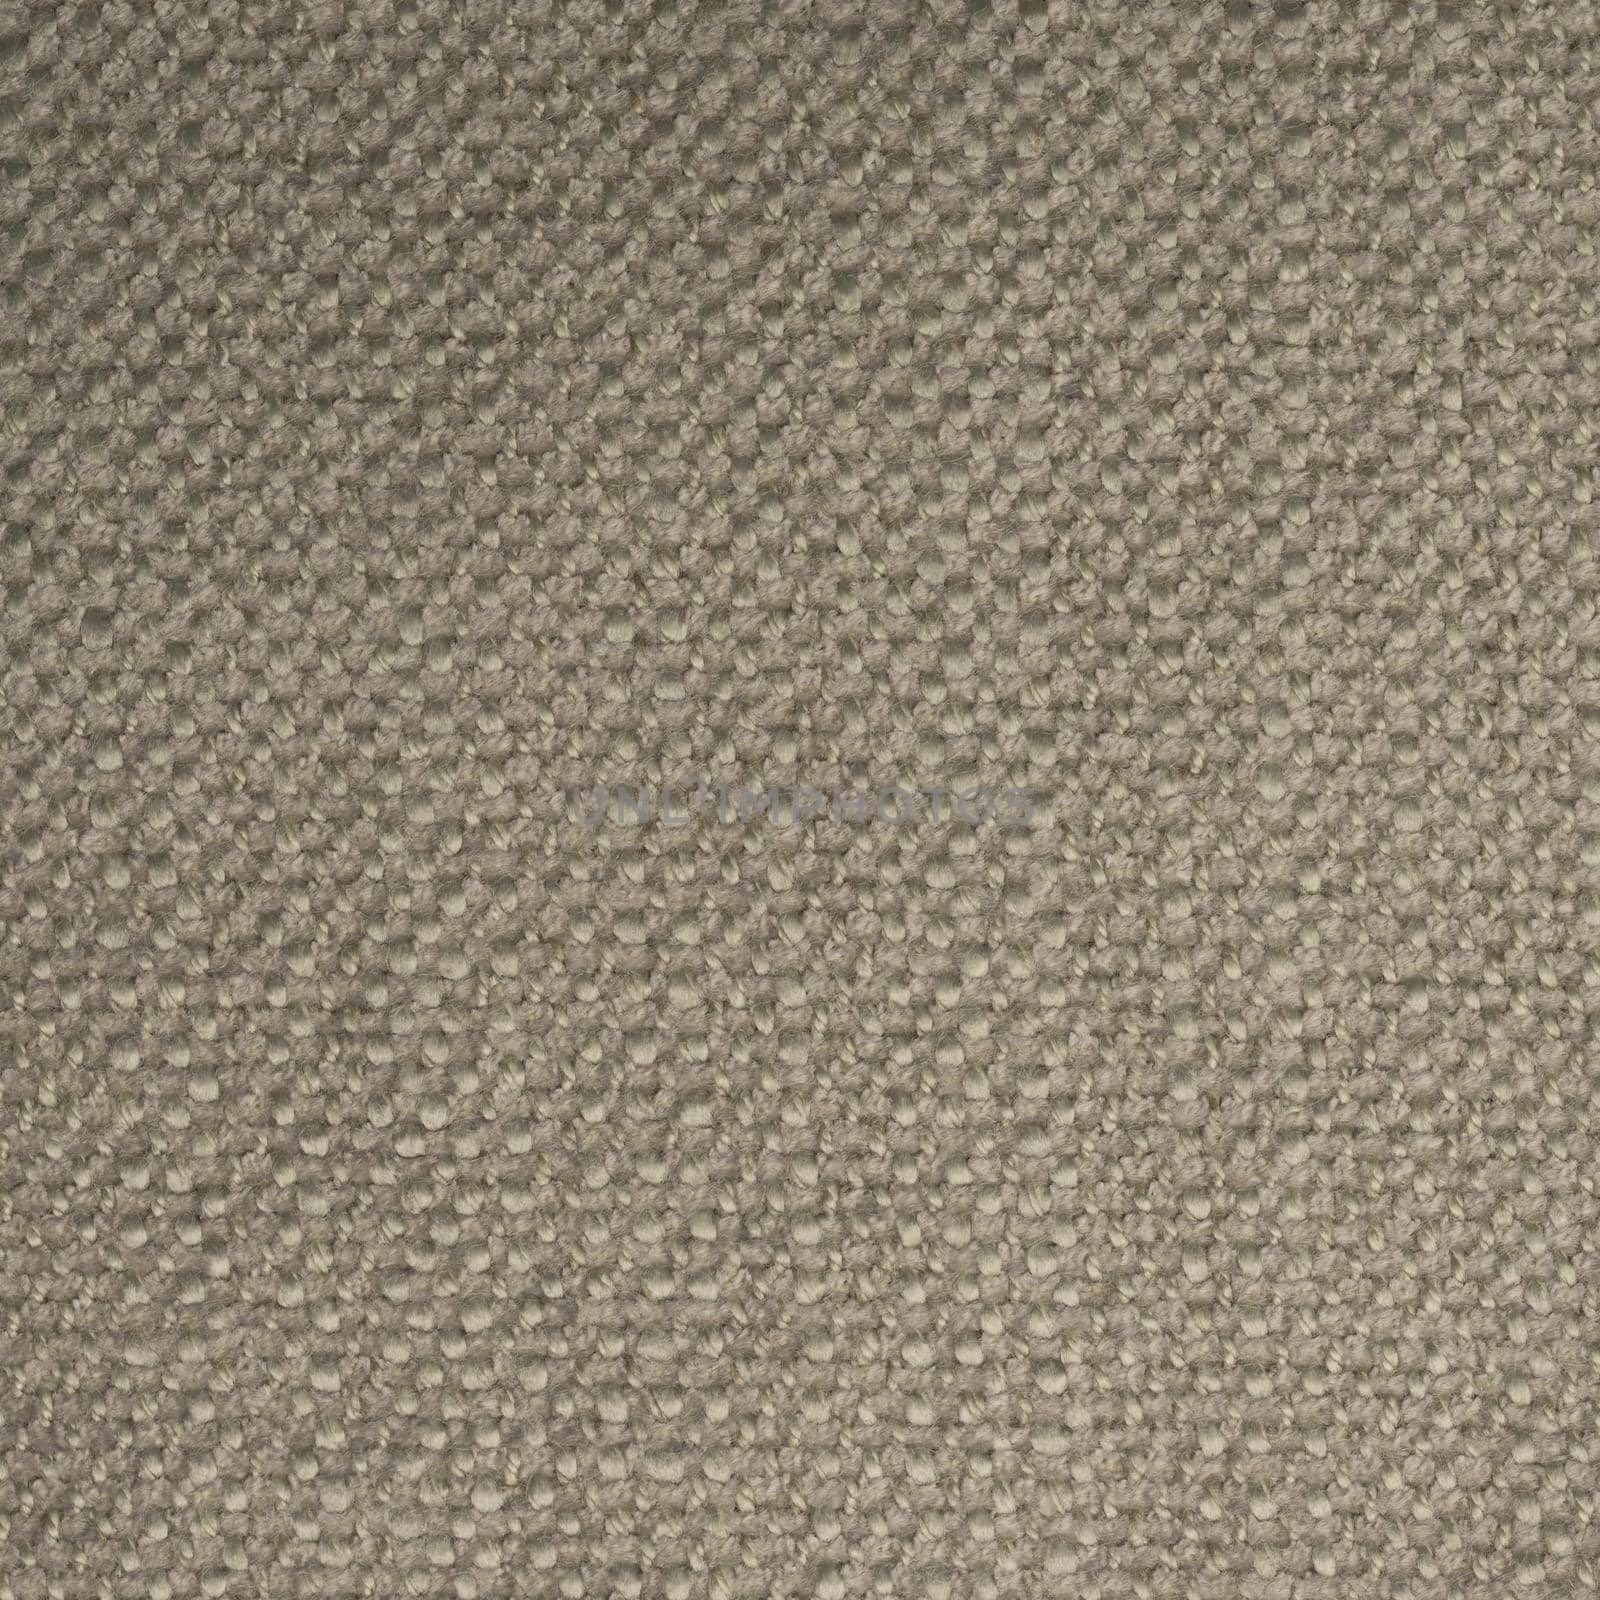 Fabric texture closeup macro shot for the background